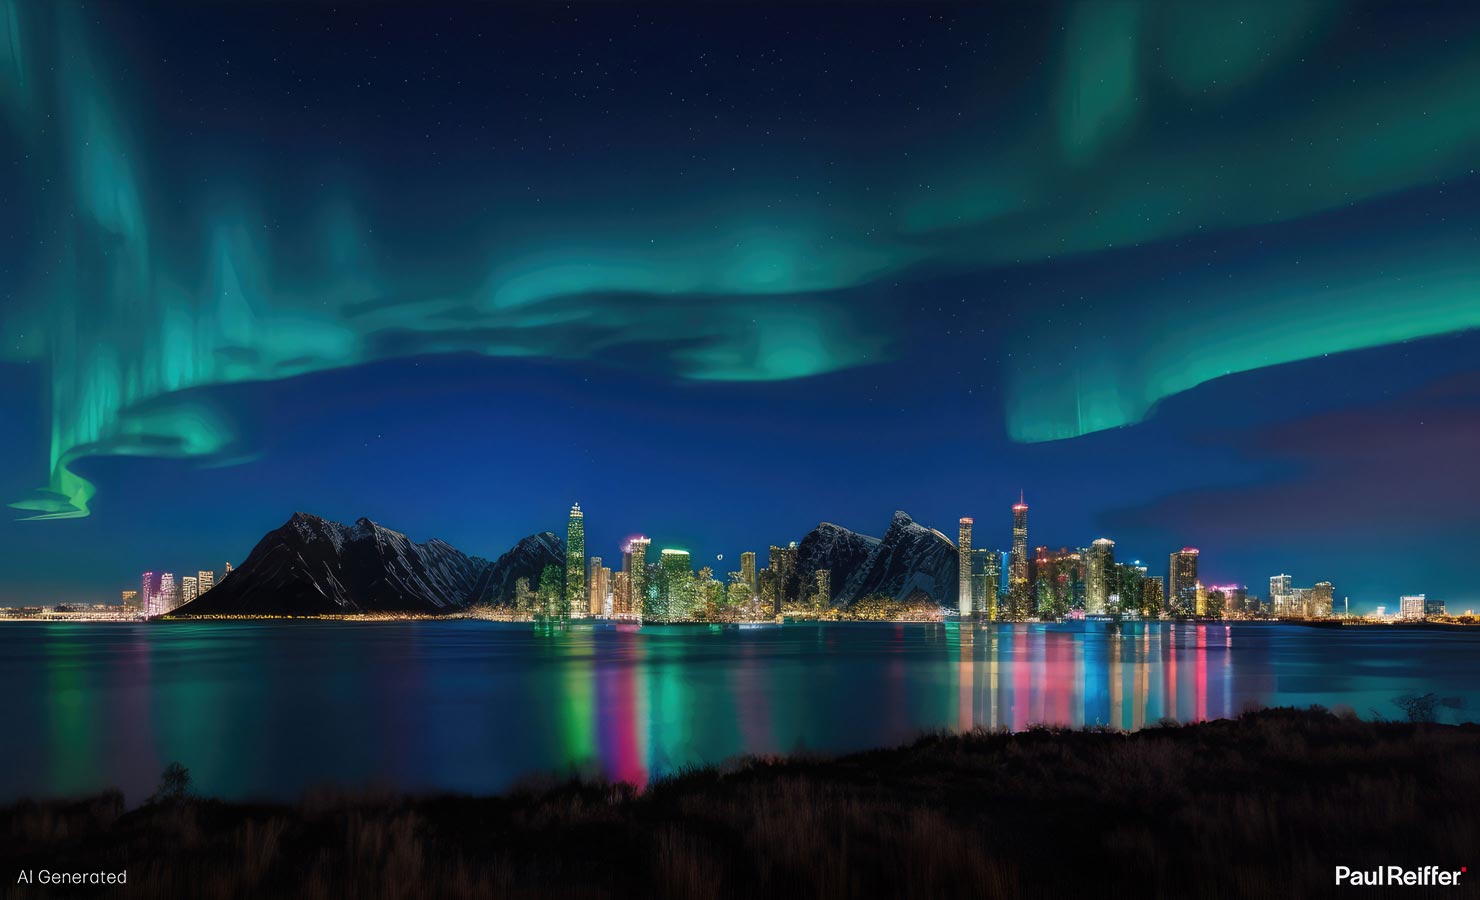 Miami Iceland Skyline Northern Lights Midjourney Imagine Blend Concepts Seed Photographers Landscape How To Use AI Images Good Bad Review Bard Bing ChatGPT Guide Paul Reiffer